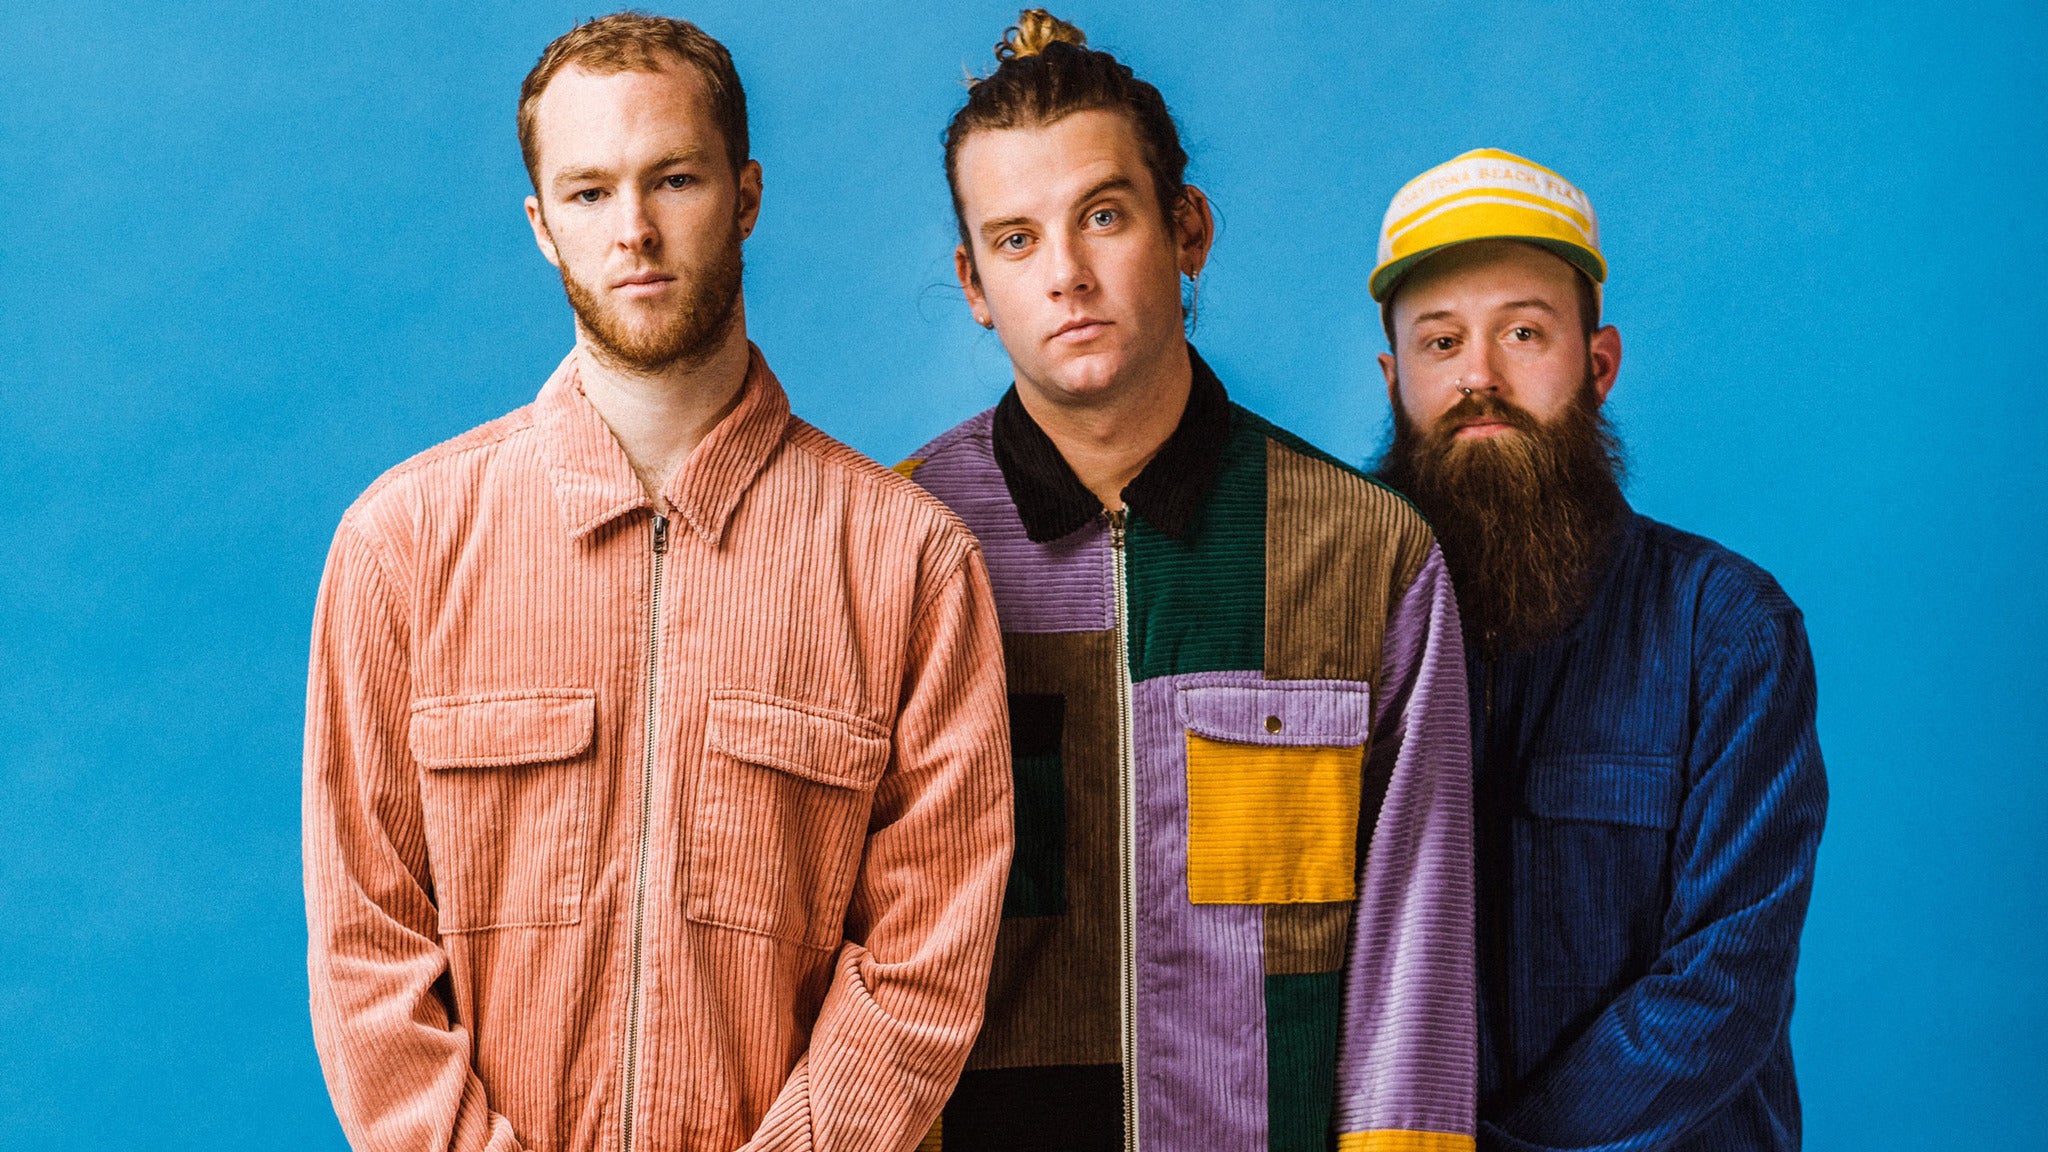 Judah & the Lion - Going to Mars Tour in New York promo photo for Live Nation presale offer code